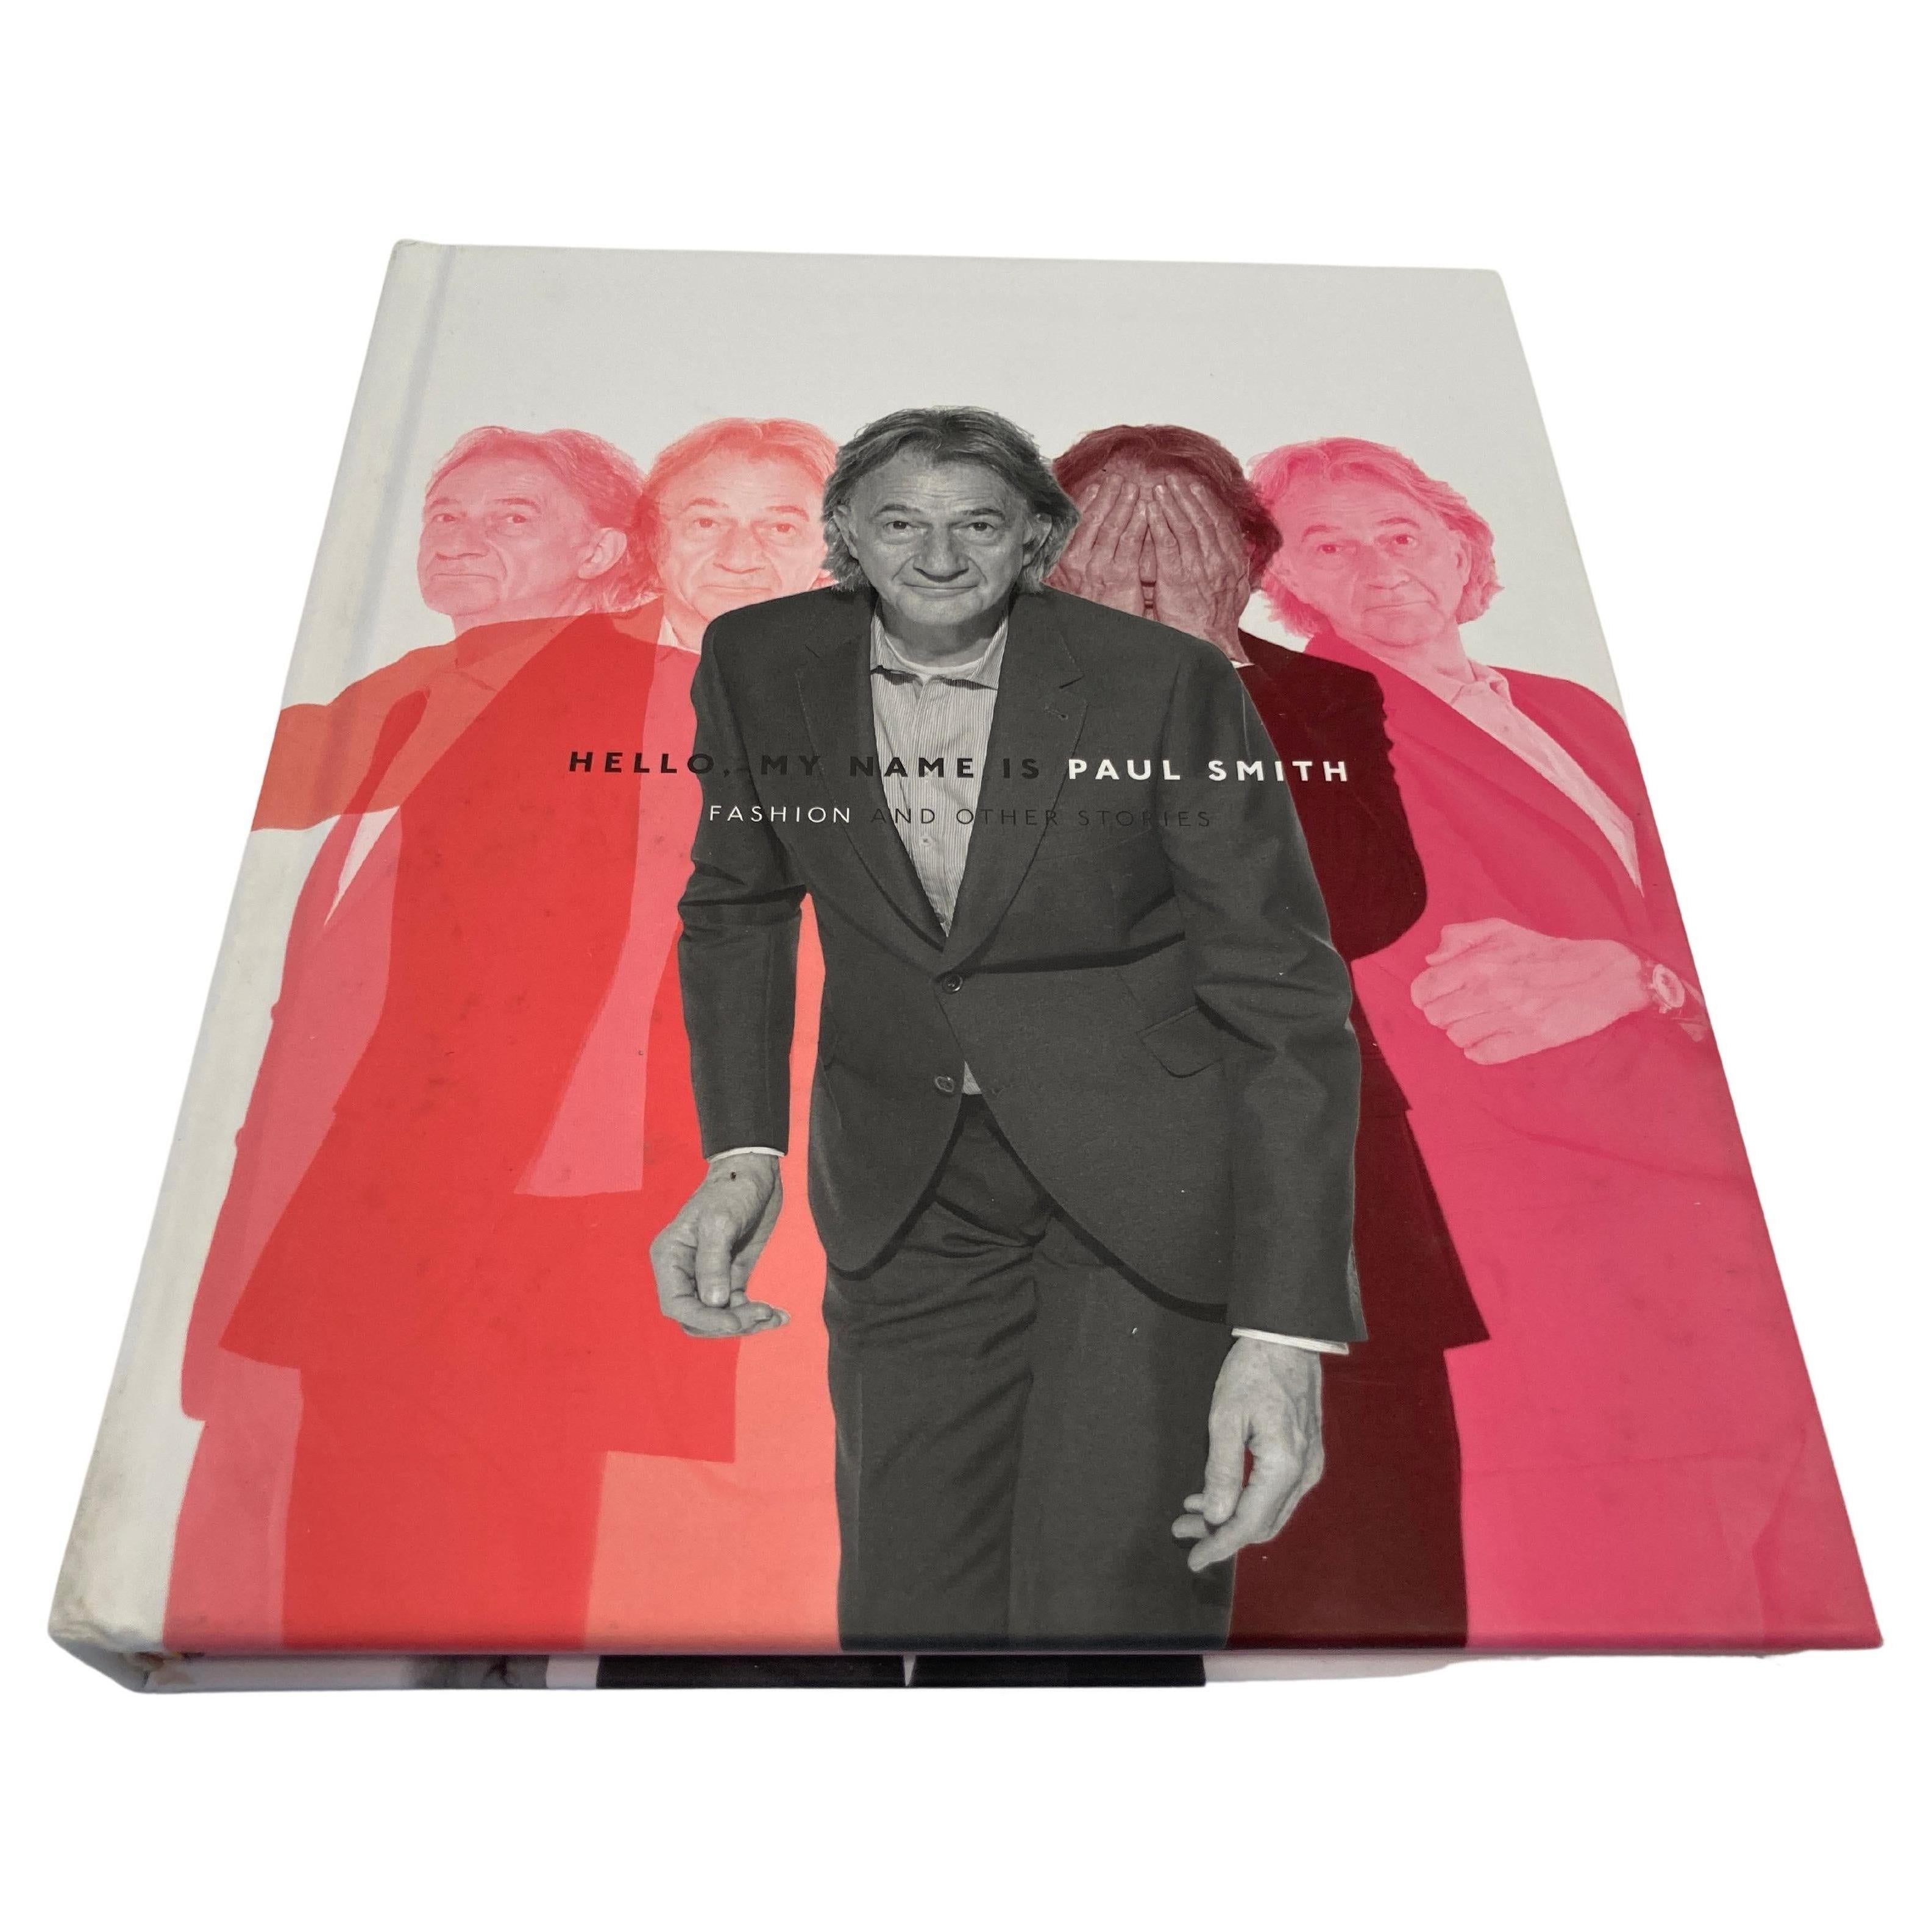 Hello, My Name is Paul Smith: Fashion and Other Stories
Paul Smith, Deyan Sudjic, Donna Loveday.
Rizzoli London. 
Hardcover book.
The wonderful show at the Design Museum is commemorated here, in this magnificent hardback
This handsome volume